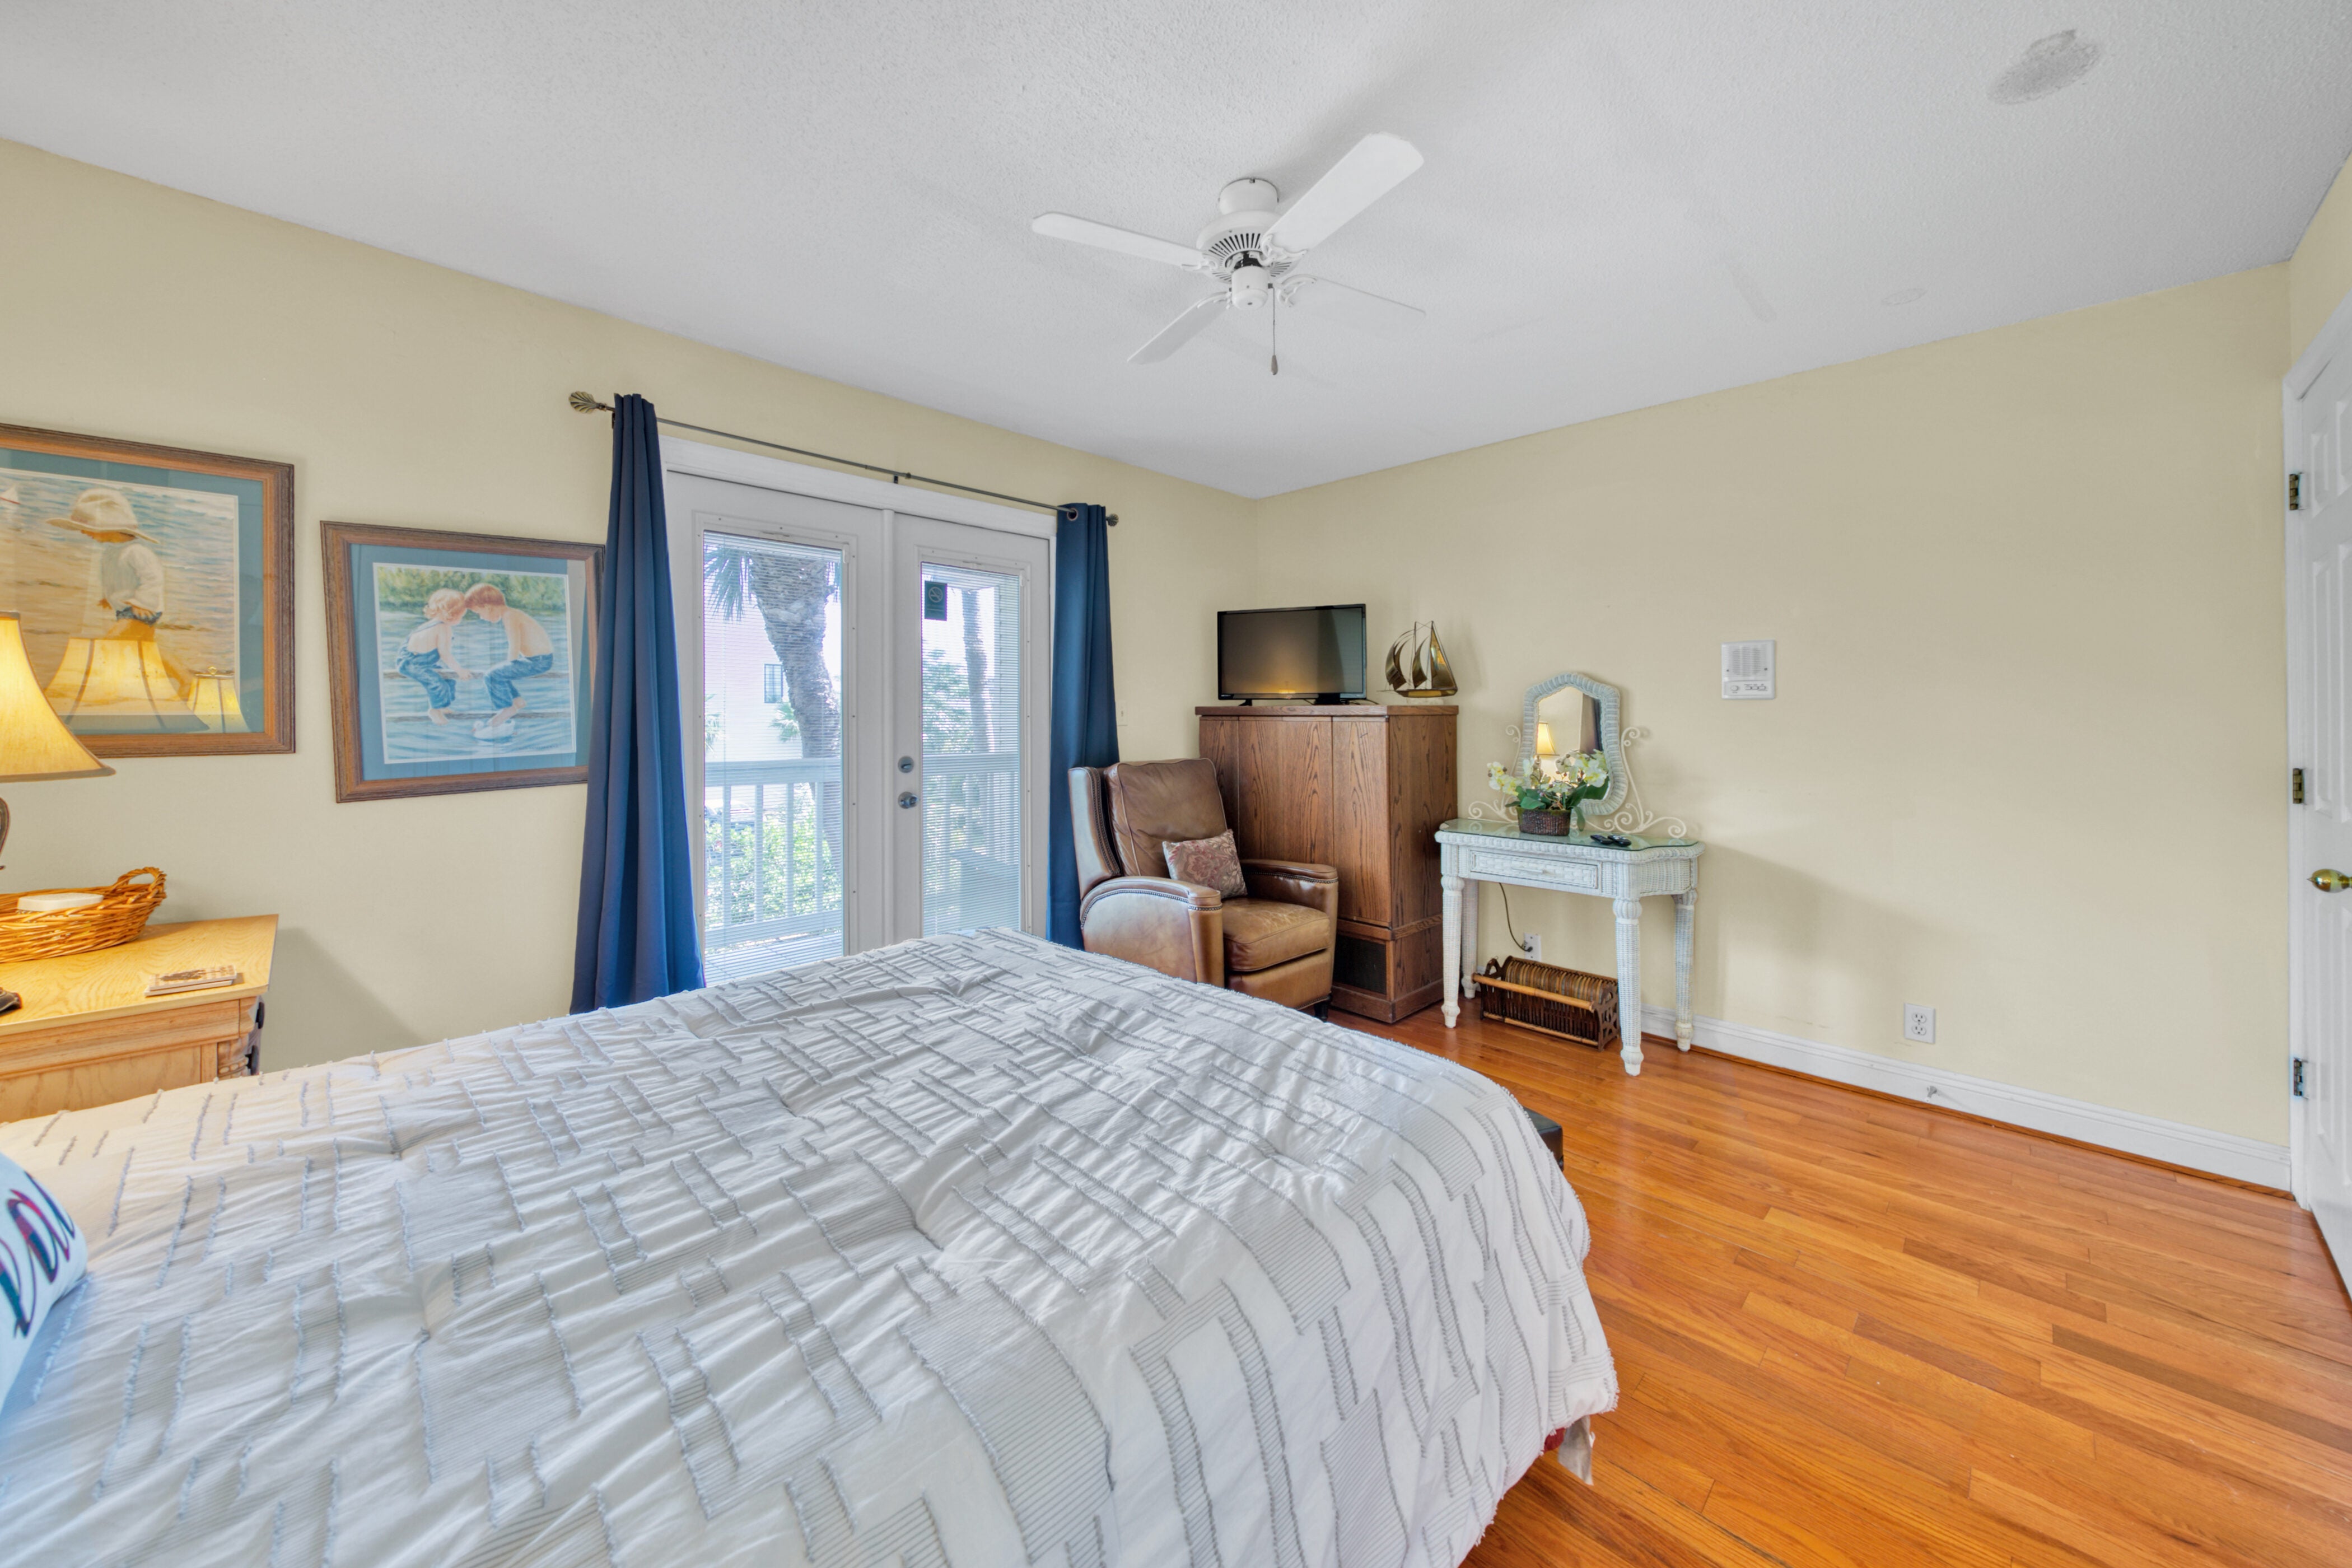 Guest bedroom with wood floors